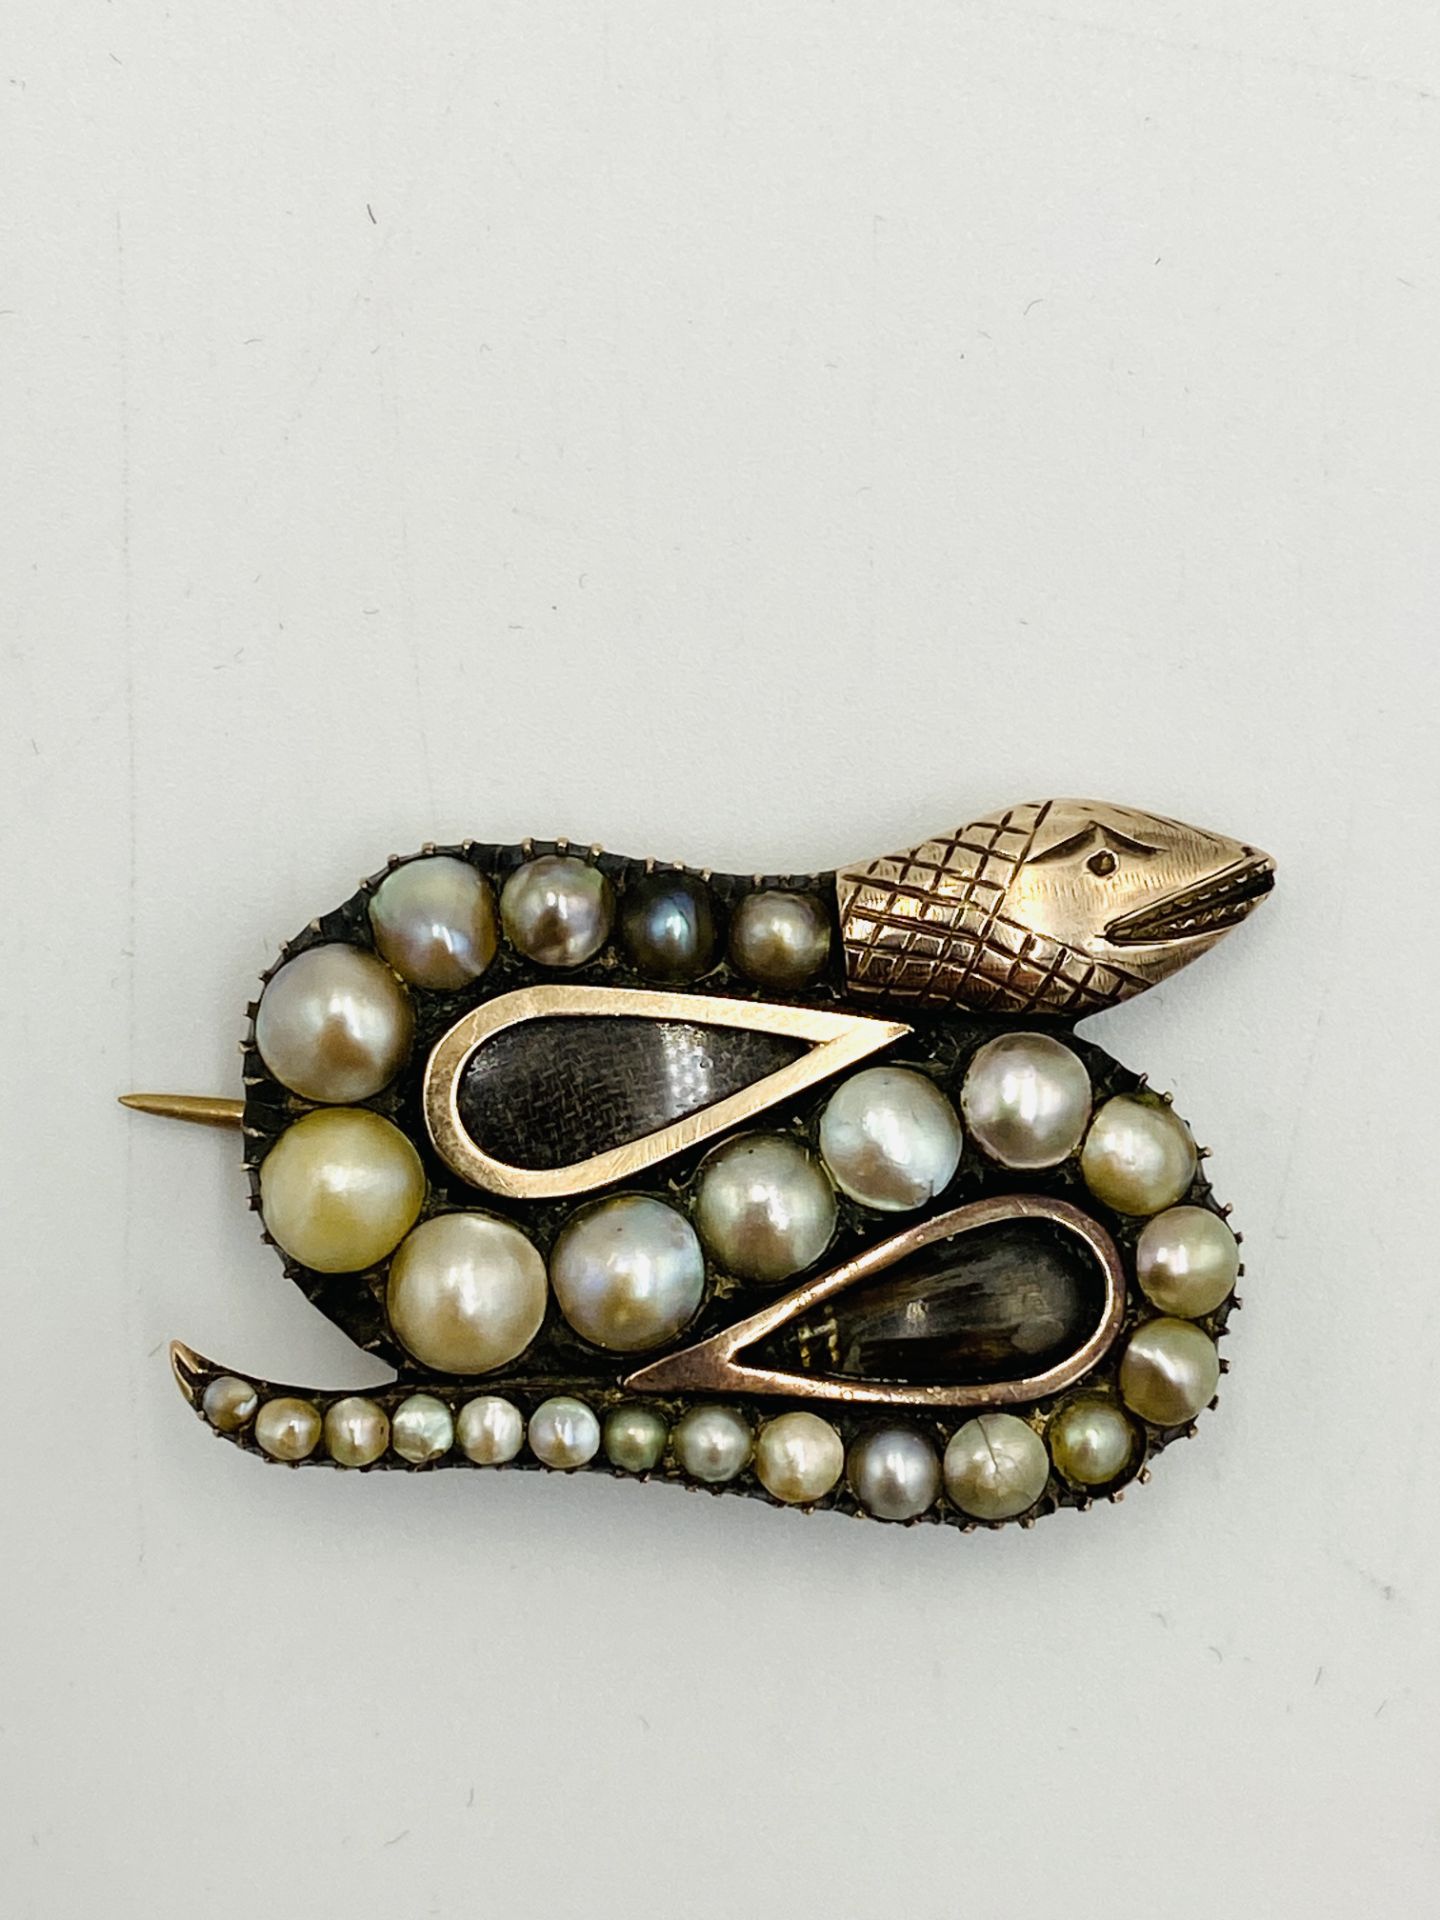 Yellow metal snake brooch set with graduated pearls - Image 2 of 6